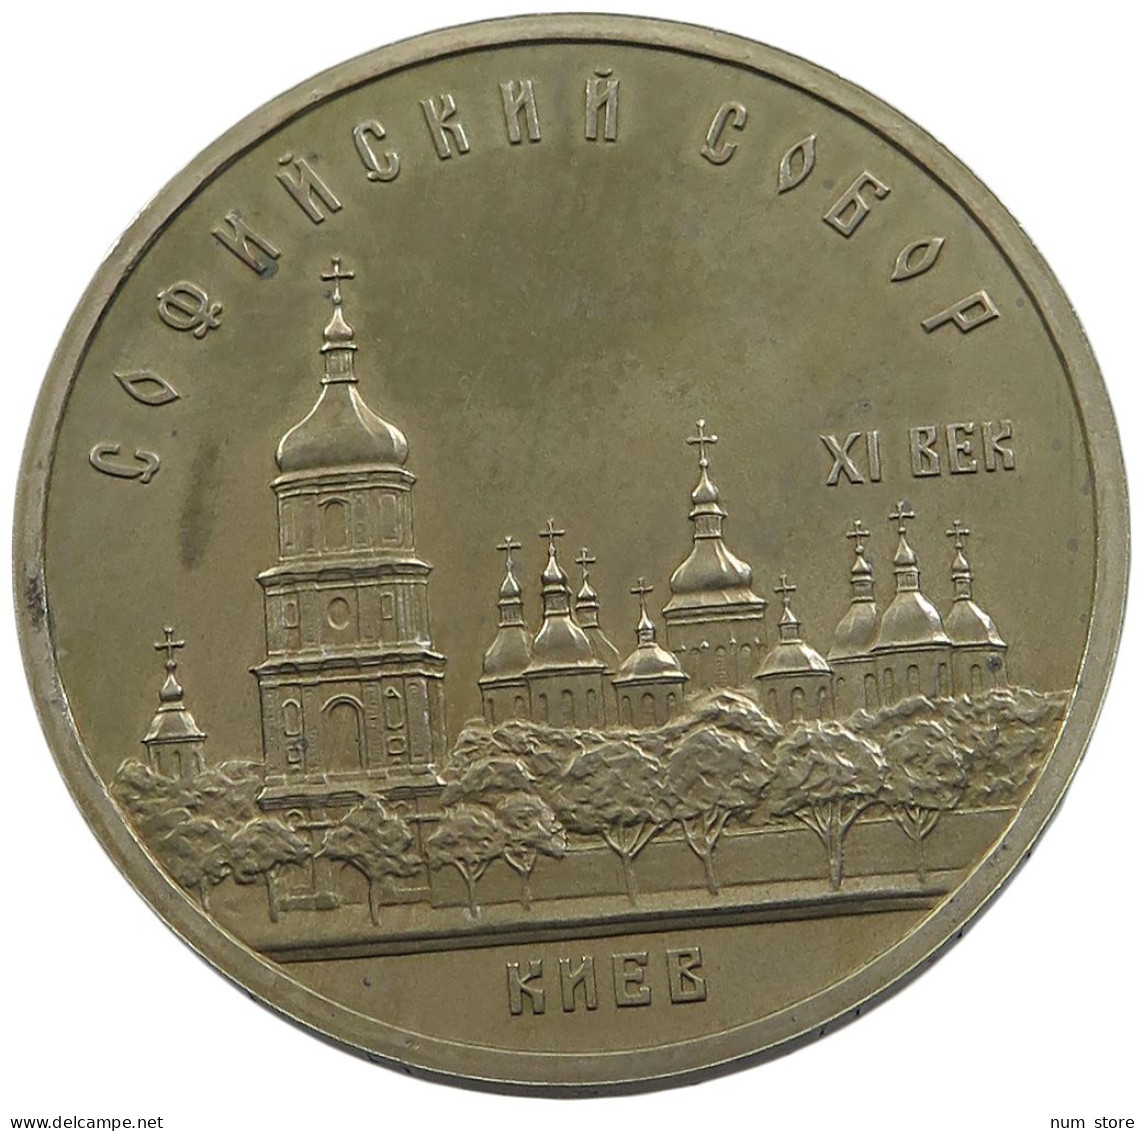 RUSSIA USSR 5 ROUBLES 1988 PROOF #sm14 0843 - Russia